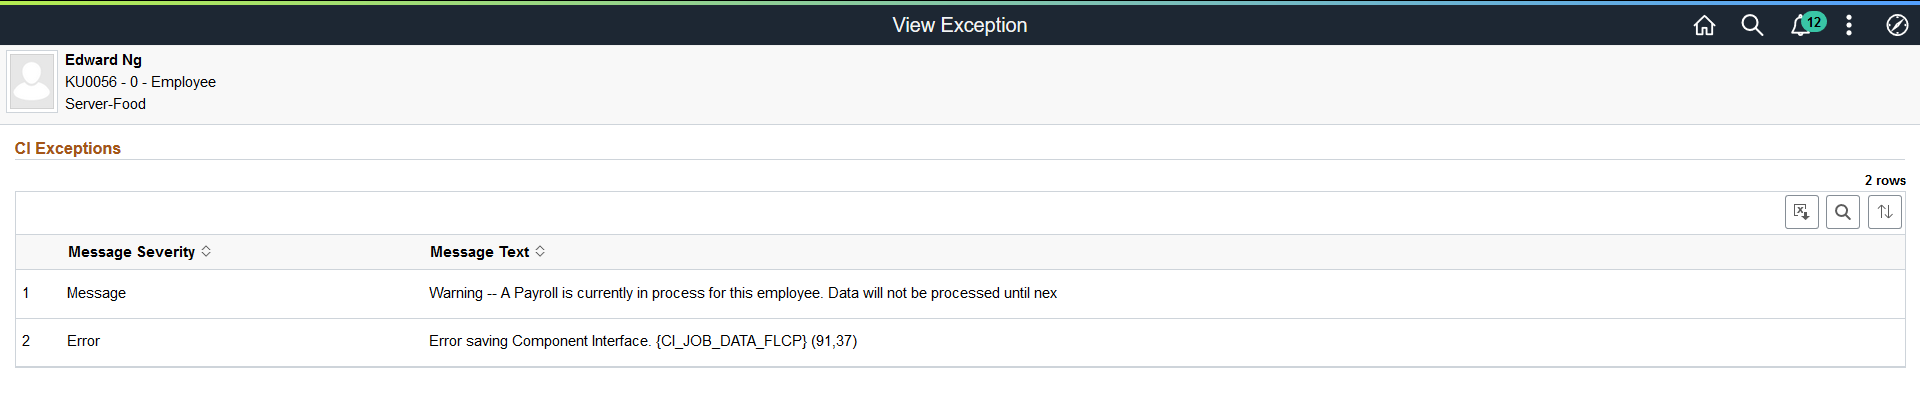 View Exception page